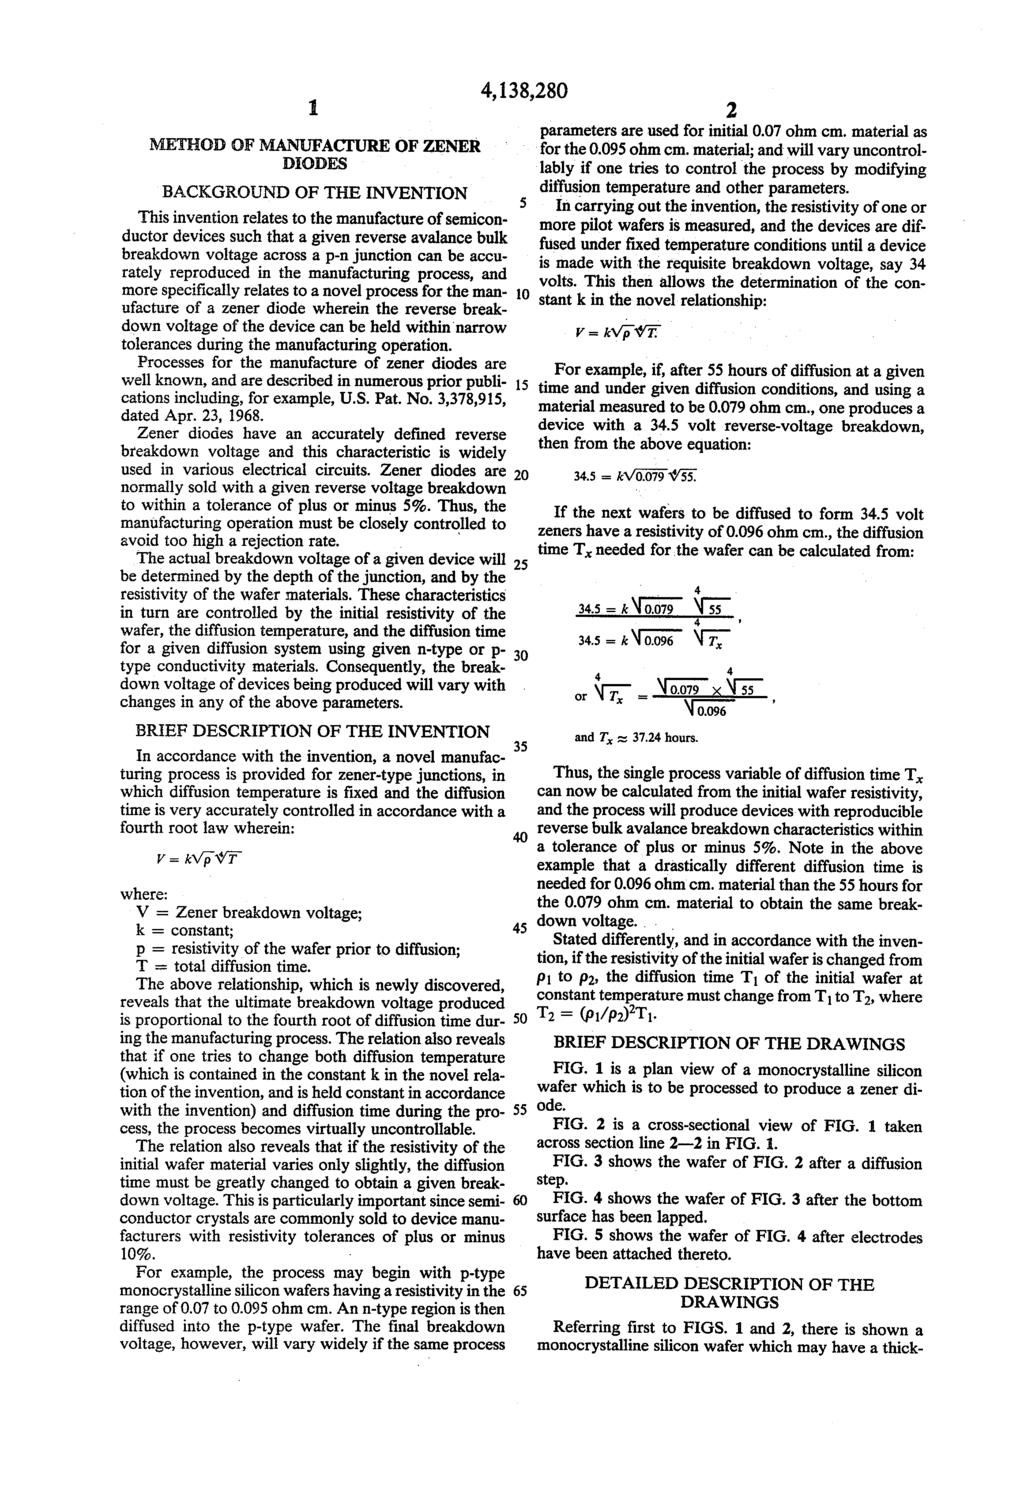 METHOD OF MANUFACTURE OF ZENER DODES BACKGROUND OF THE INVENTION This invention relates to the manufacture of semicon ductor devices such that a given reverse avalance bulk breakdown voltage across a